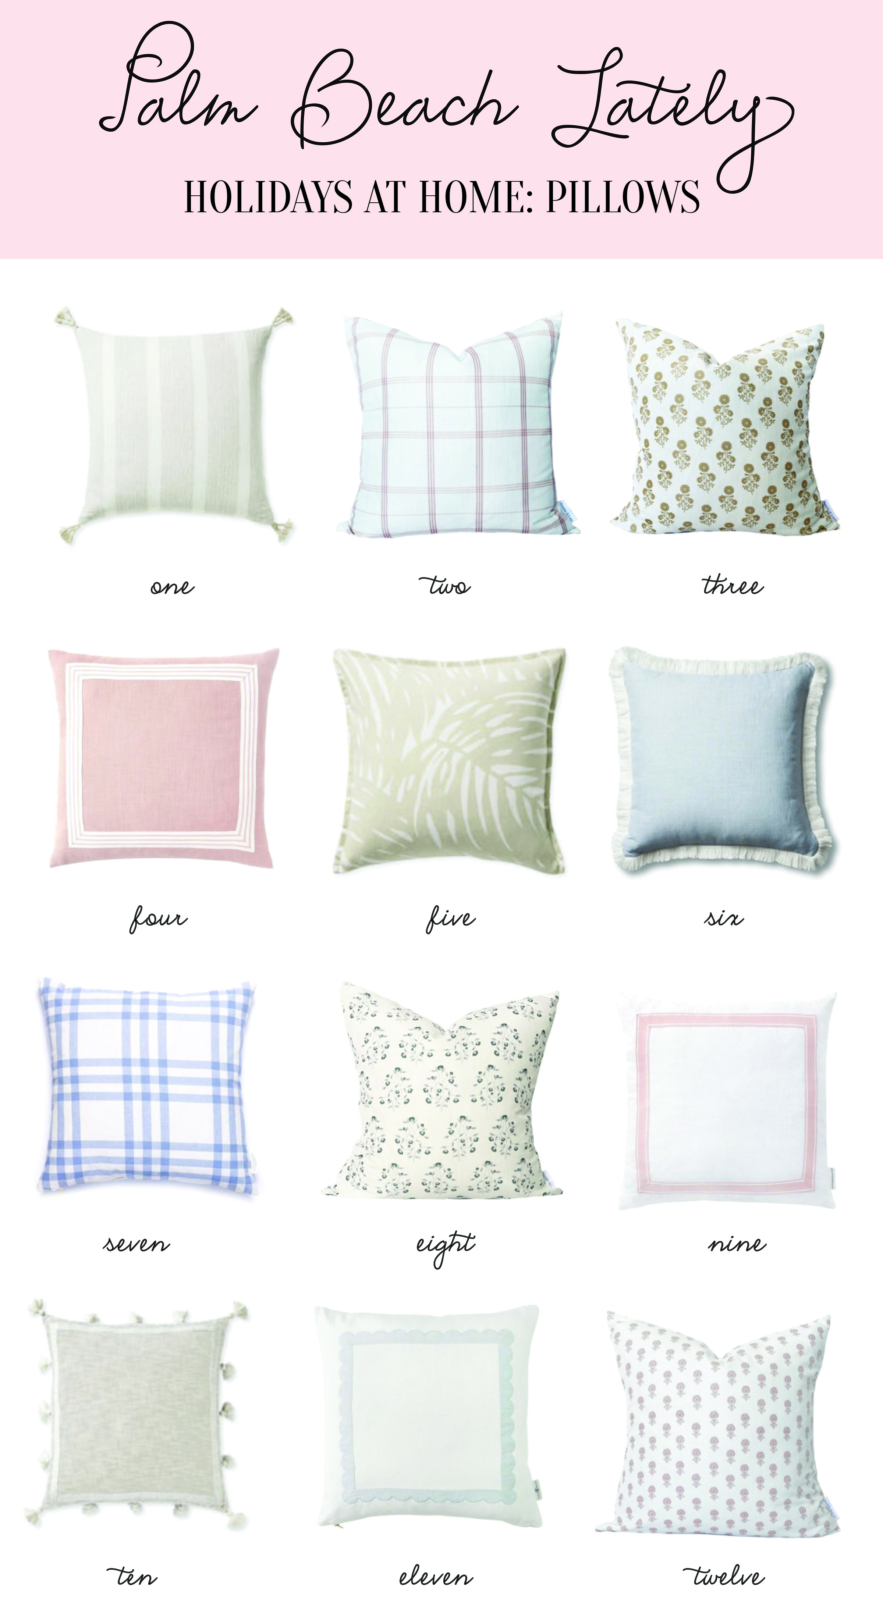 Holidays at Home: Pillows with Palm Beach Lately